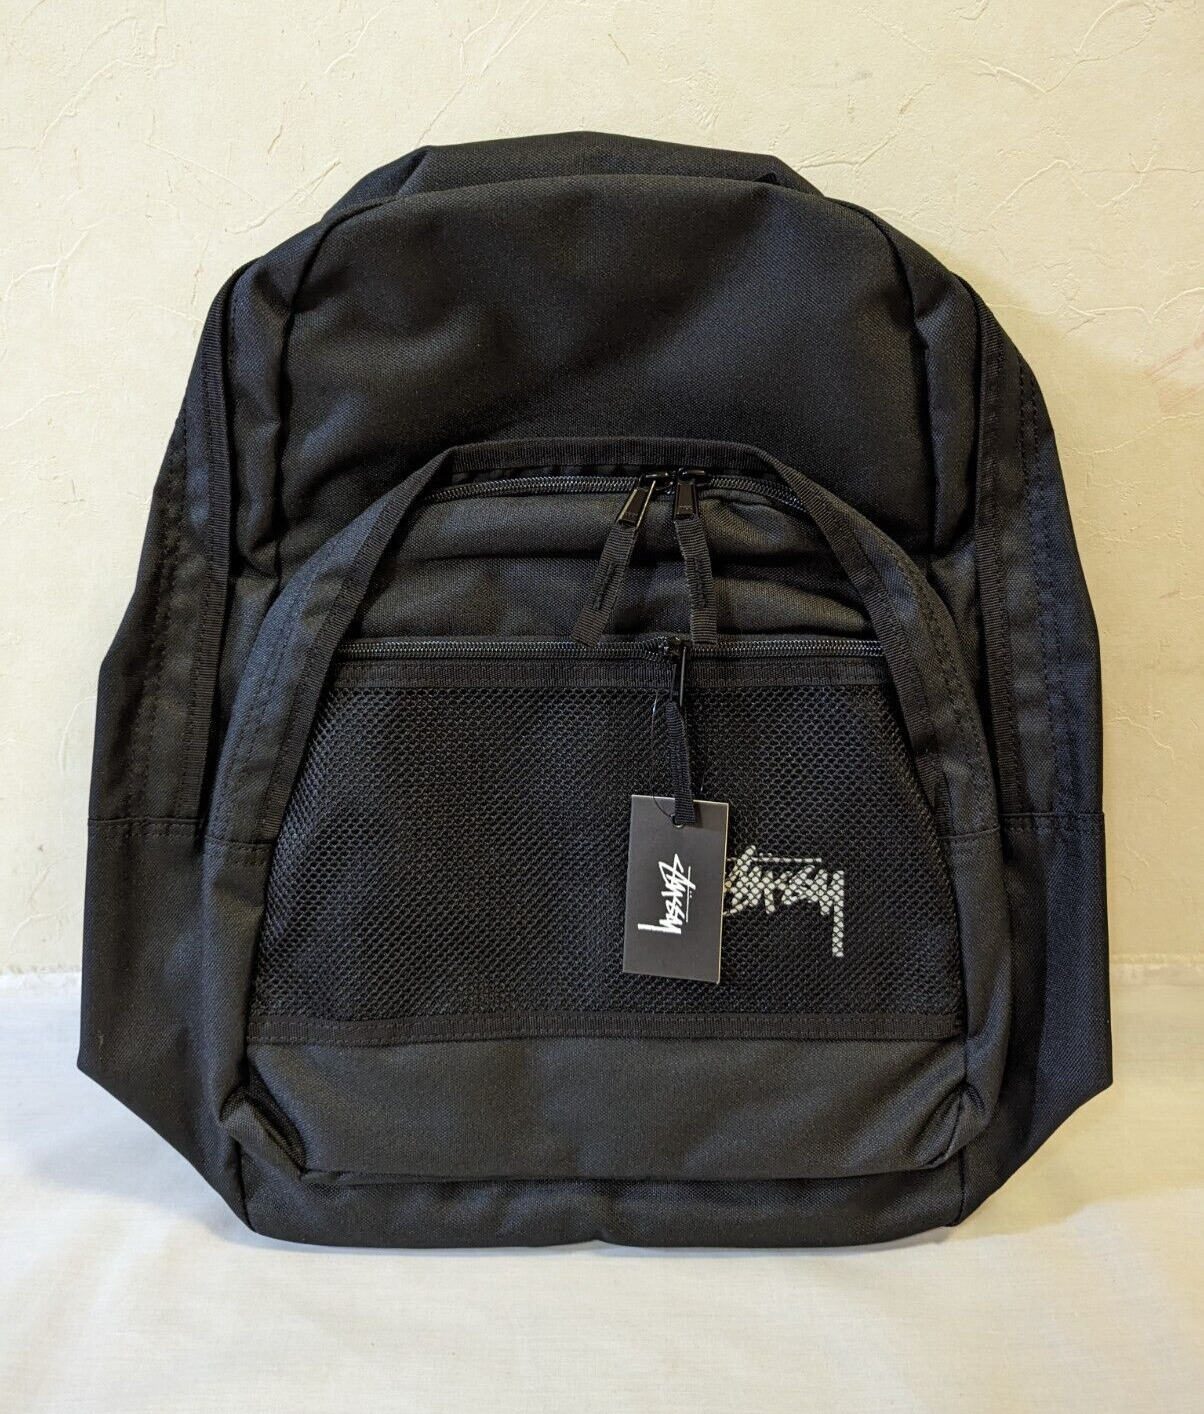 STUSSY Stock Backpack Black Daypack Logo Print Laptop Compartment Available NEW